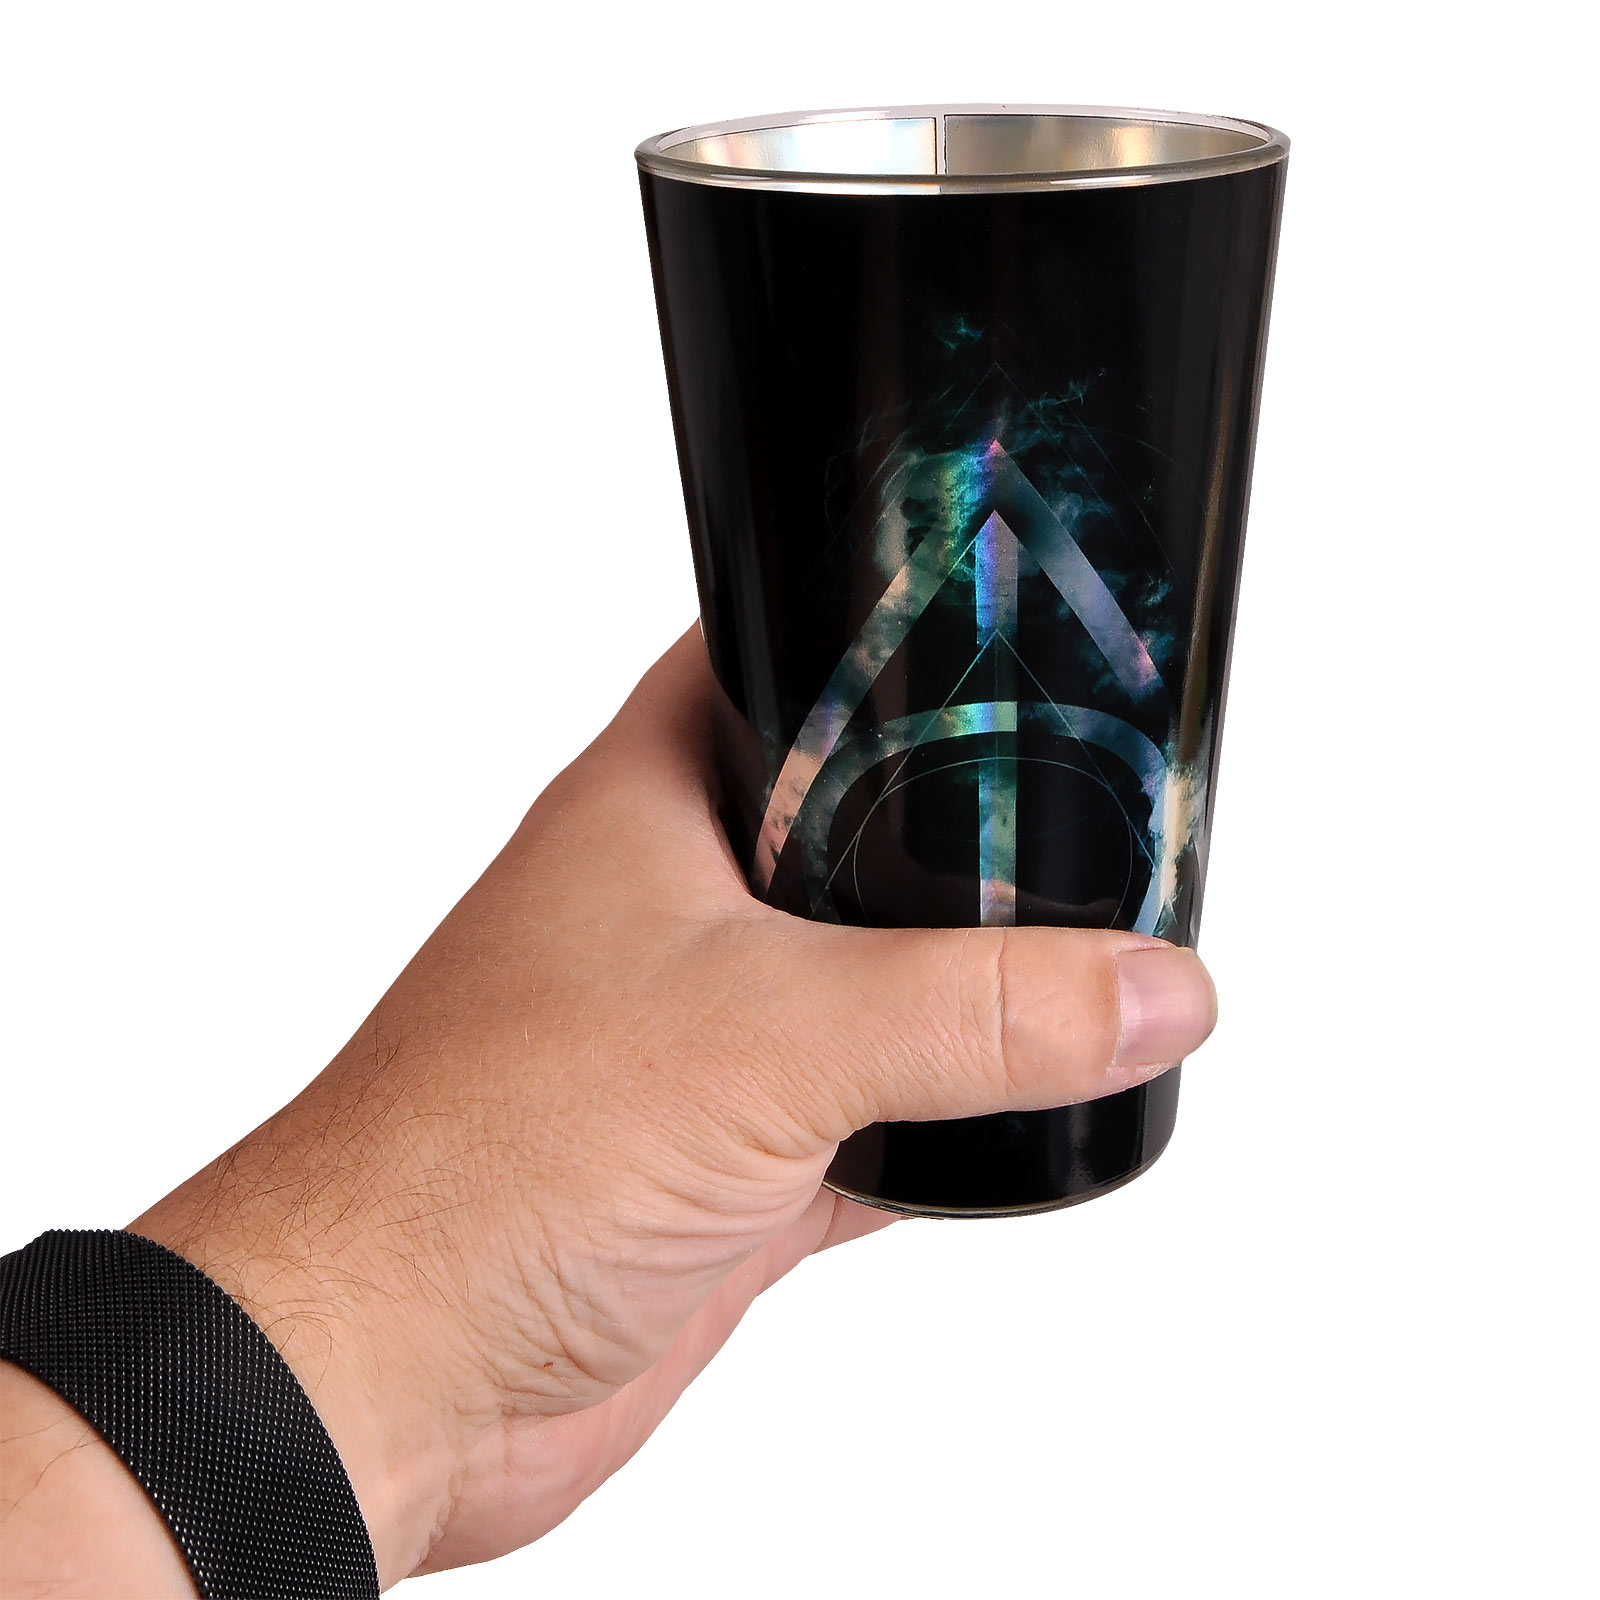 Harry Potter - Deathly Hallows glass black